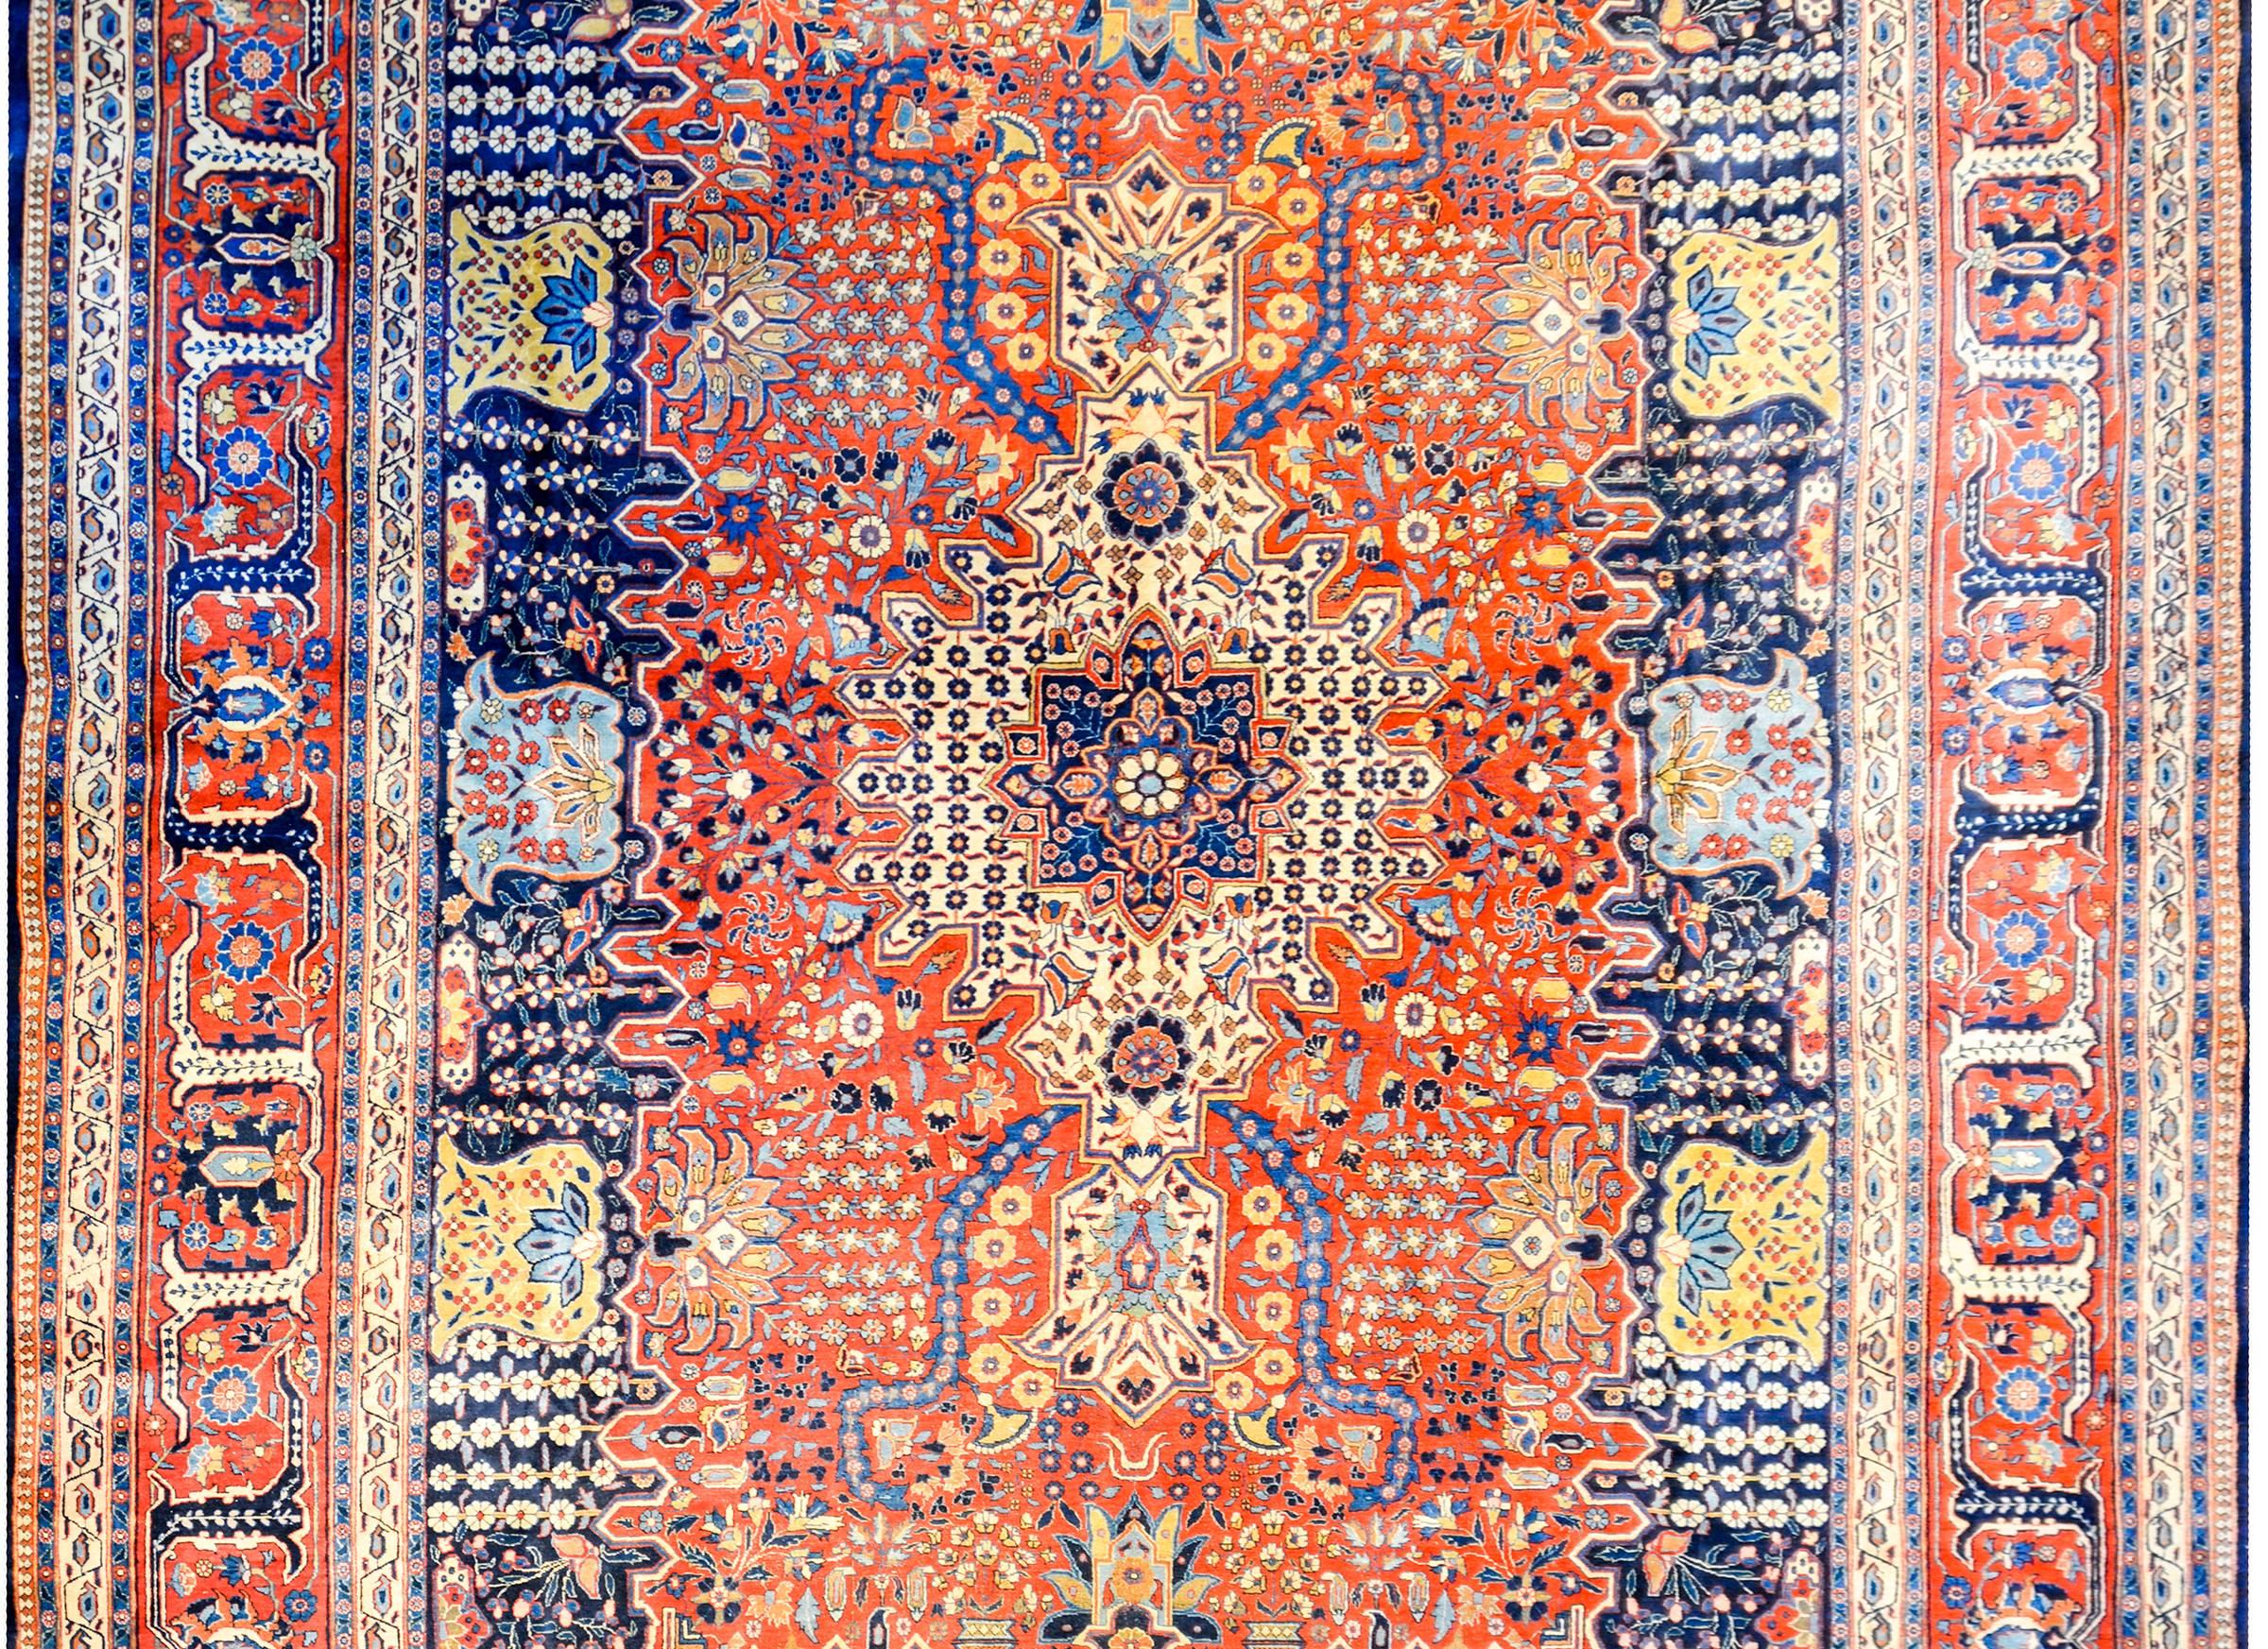 An unbelievable early 20th century Persian Dabir Kashan rug with the most densely woven field we've ever seen containing myriad flowers, leaves, and vines, all woven in crimson, indigo, gold, and cream colored vegetable dyed wool. The border is as